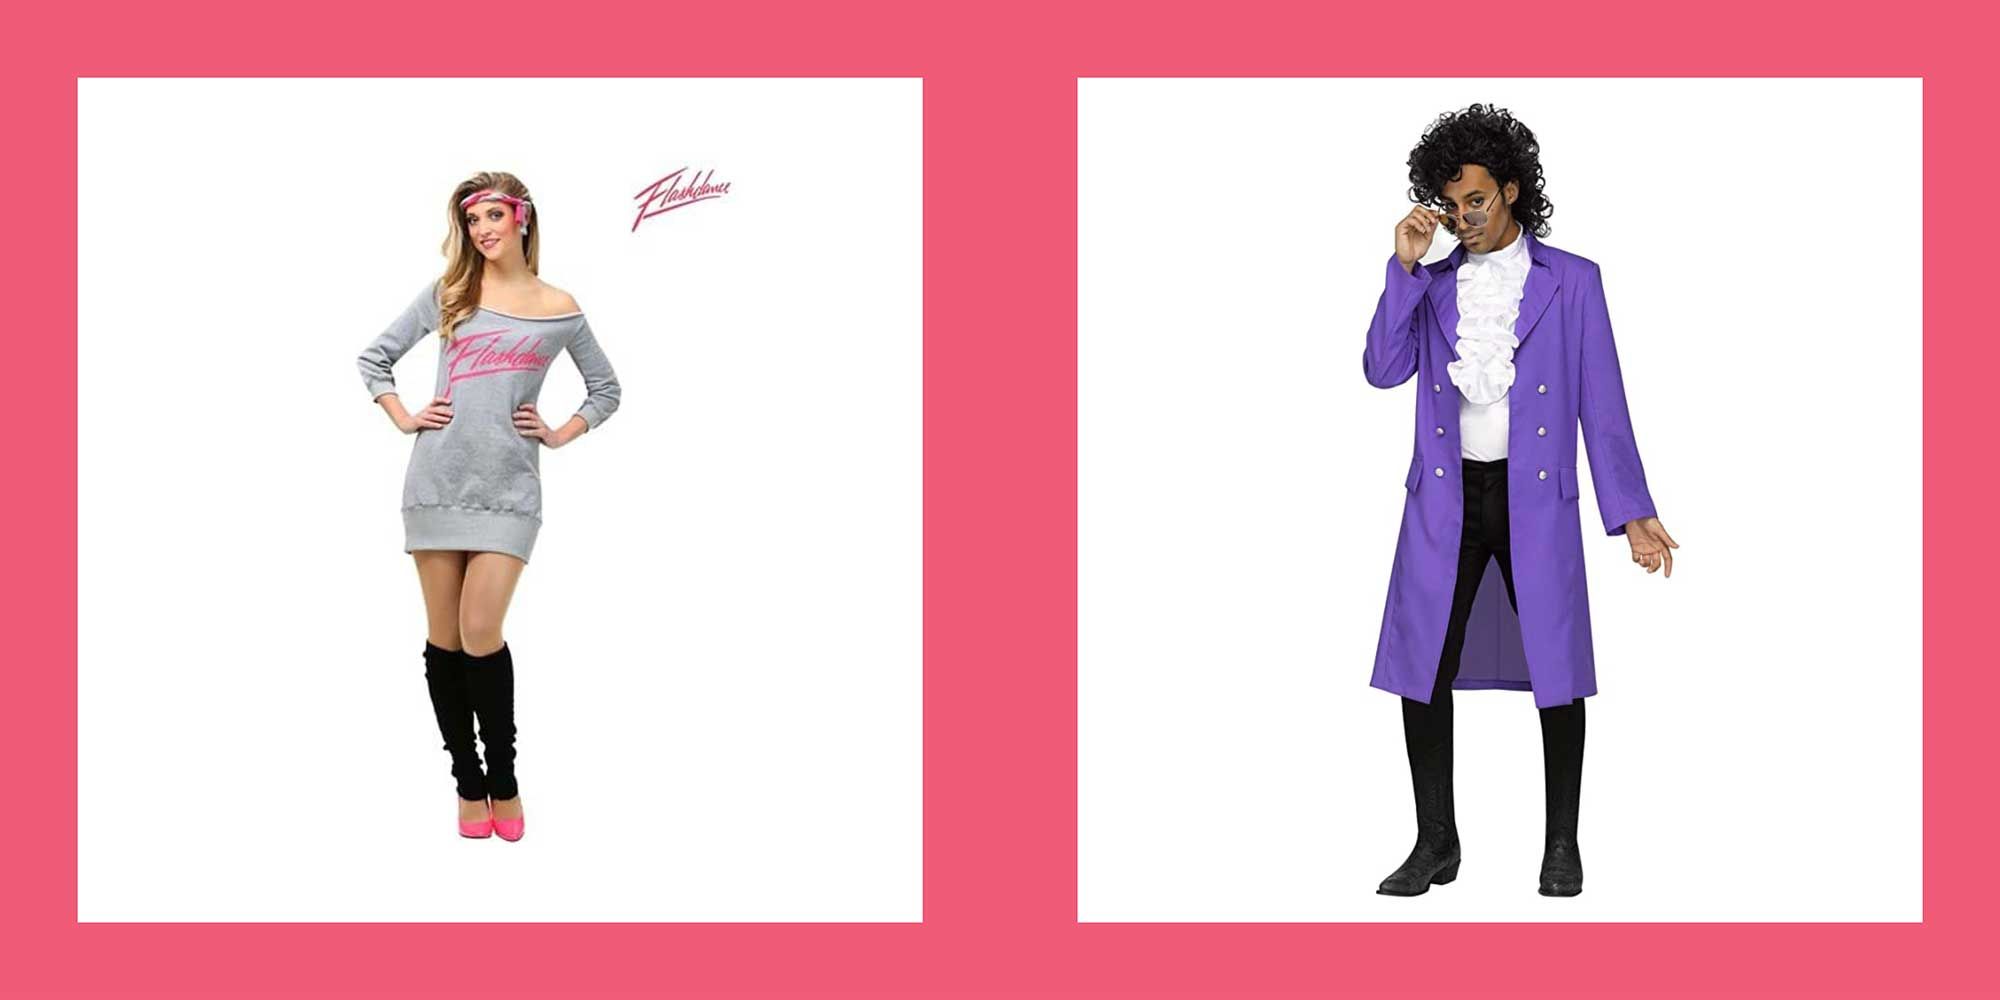 22 Best 80's outfit ideas  80s outfit, 80s party outfits, 80s costume